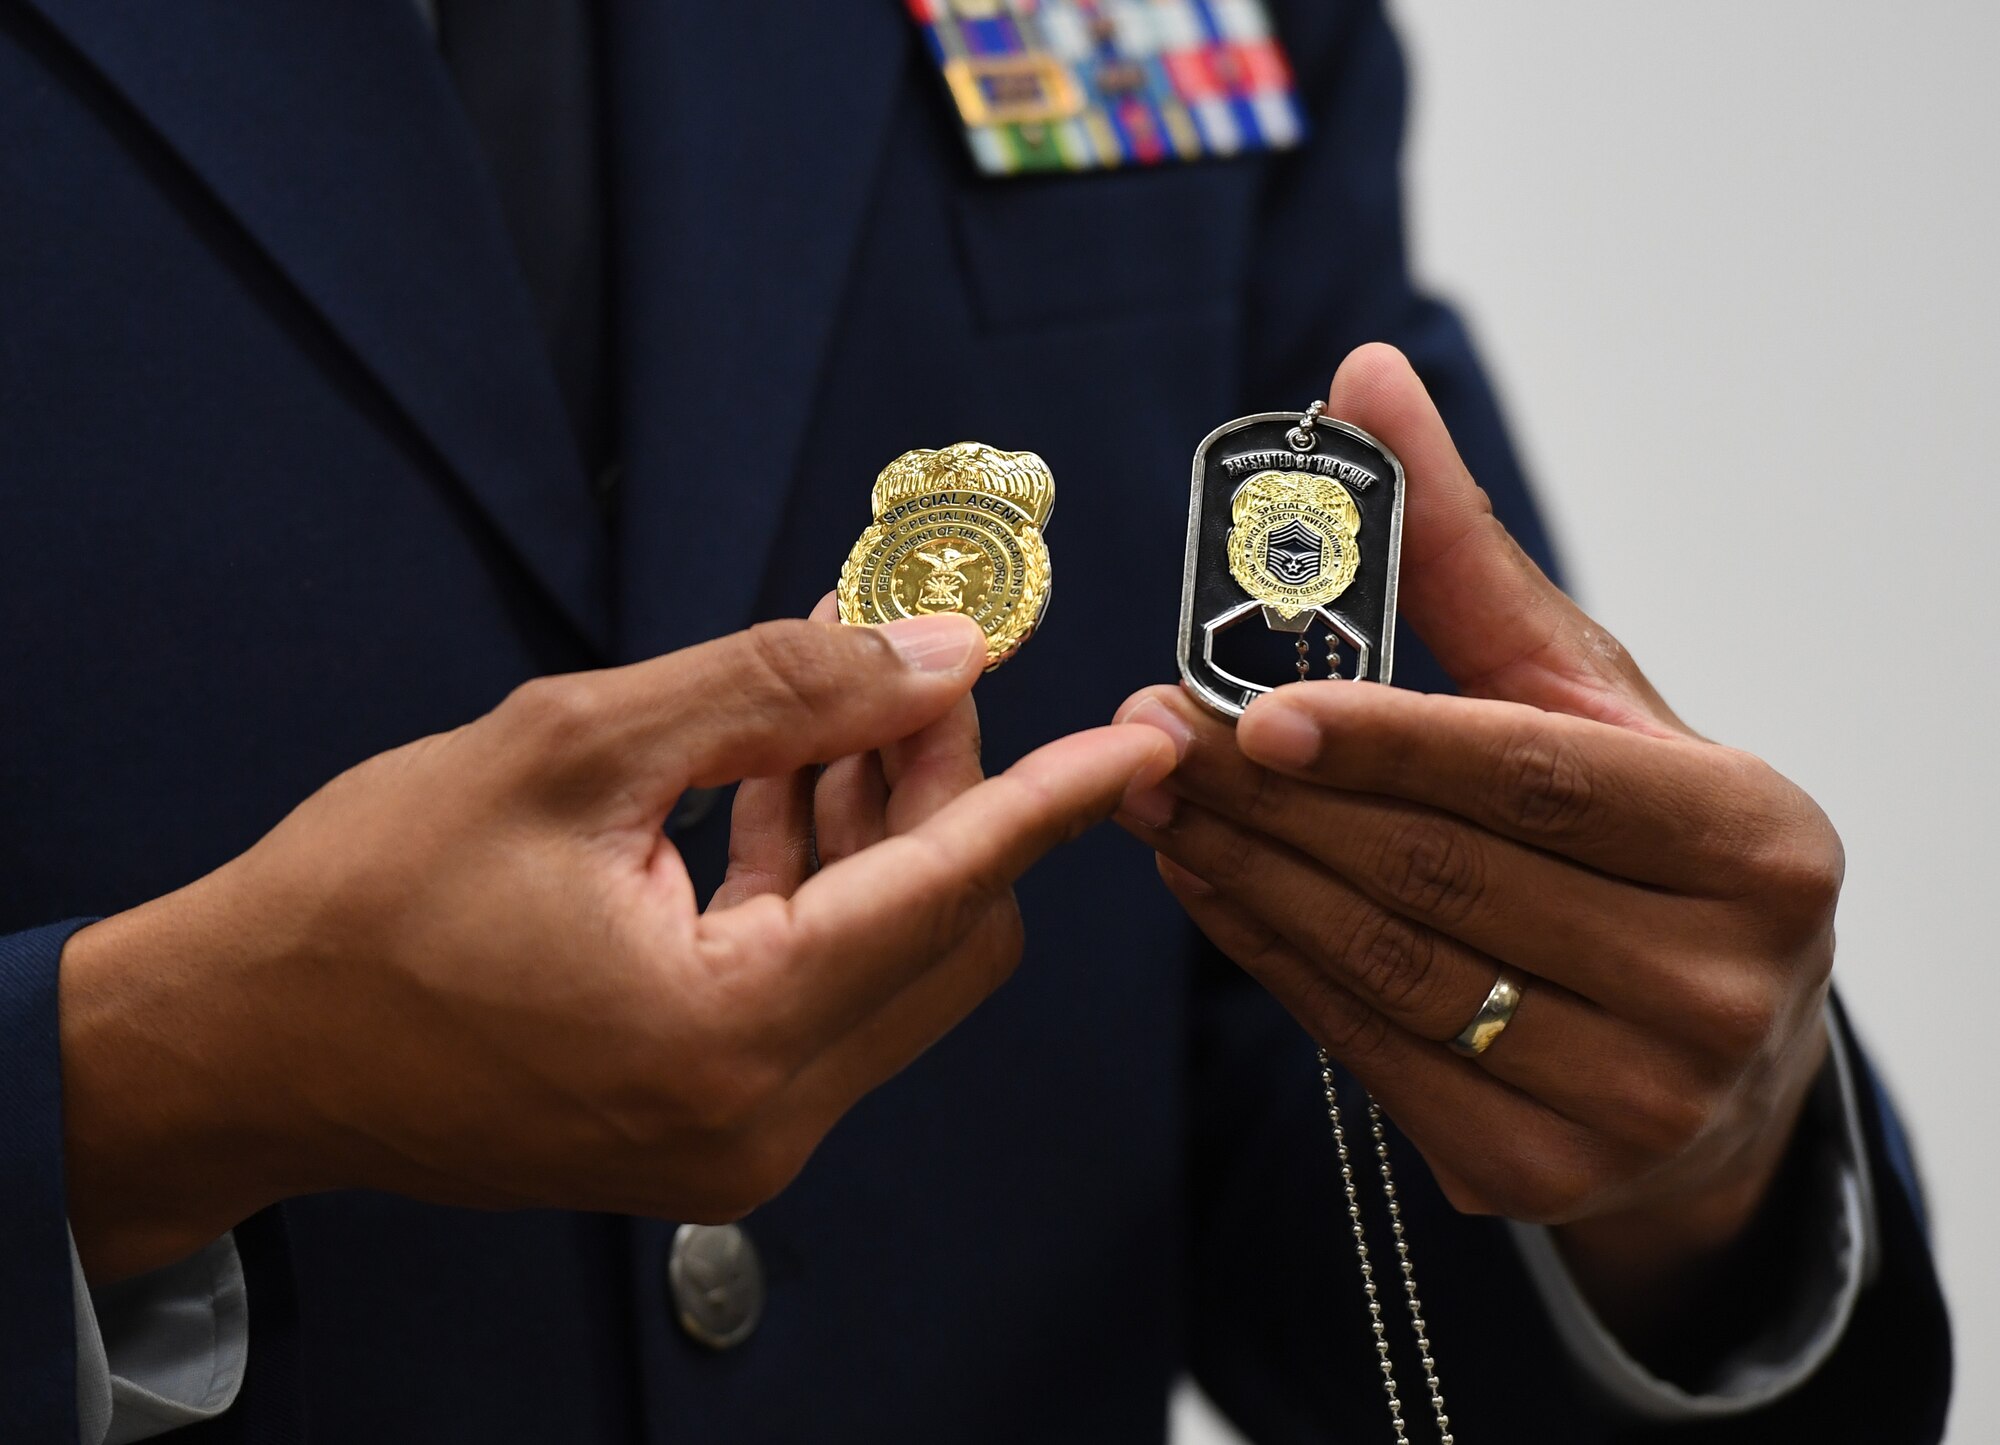 U.S. Air Force Special Agent Shannon Robinson, Air Force Office of Special Investigations Detachment 407 commander, holds mementos during a presentation ceremony inside the Levitow Training Support Facility at Keesler Air Force Base, Mississippi, Sept. 11, 2020. Airman Joshua Balmer, 737th Training Group basic military training graduate and son of fallen OSI Special Agent Ryan Balmer, was presented mementos by the detachment following his graduation from BMT. (U.S. Air Force photo by Kemberly Groue)